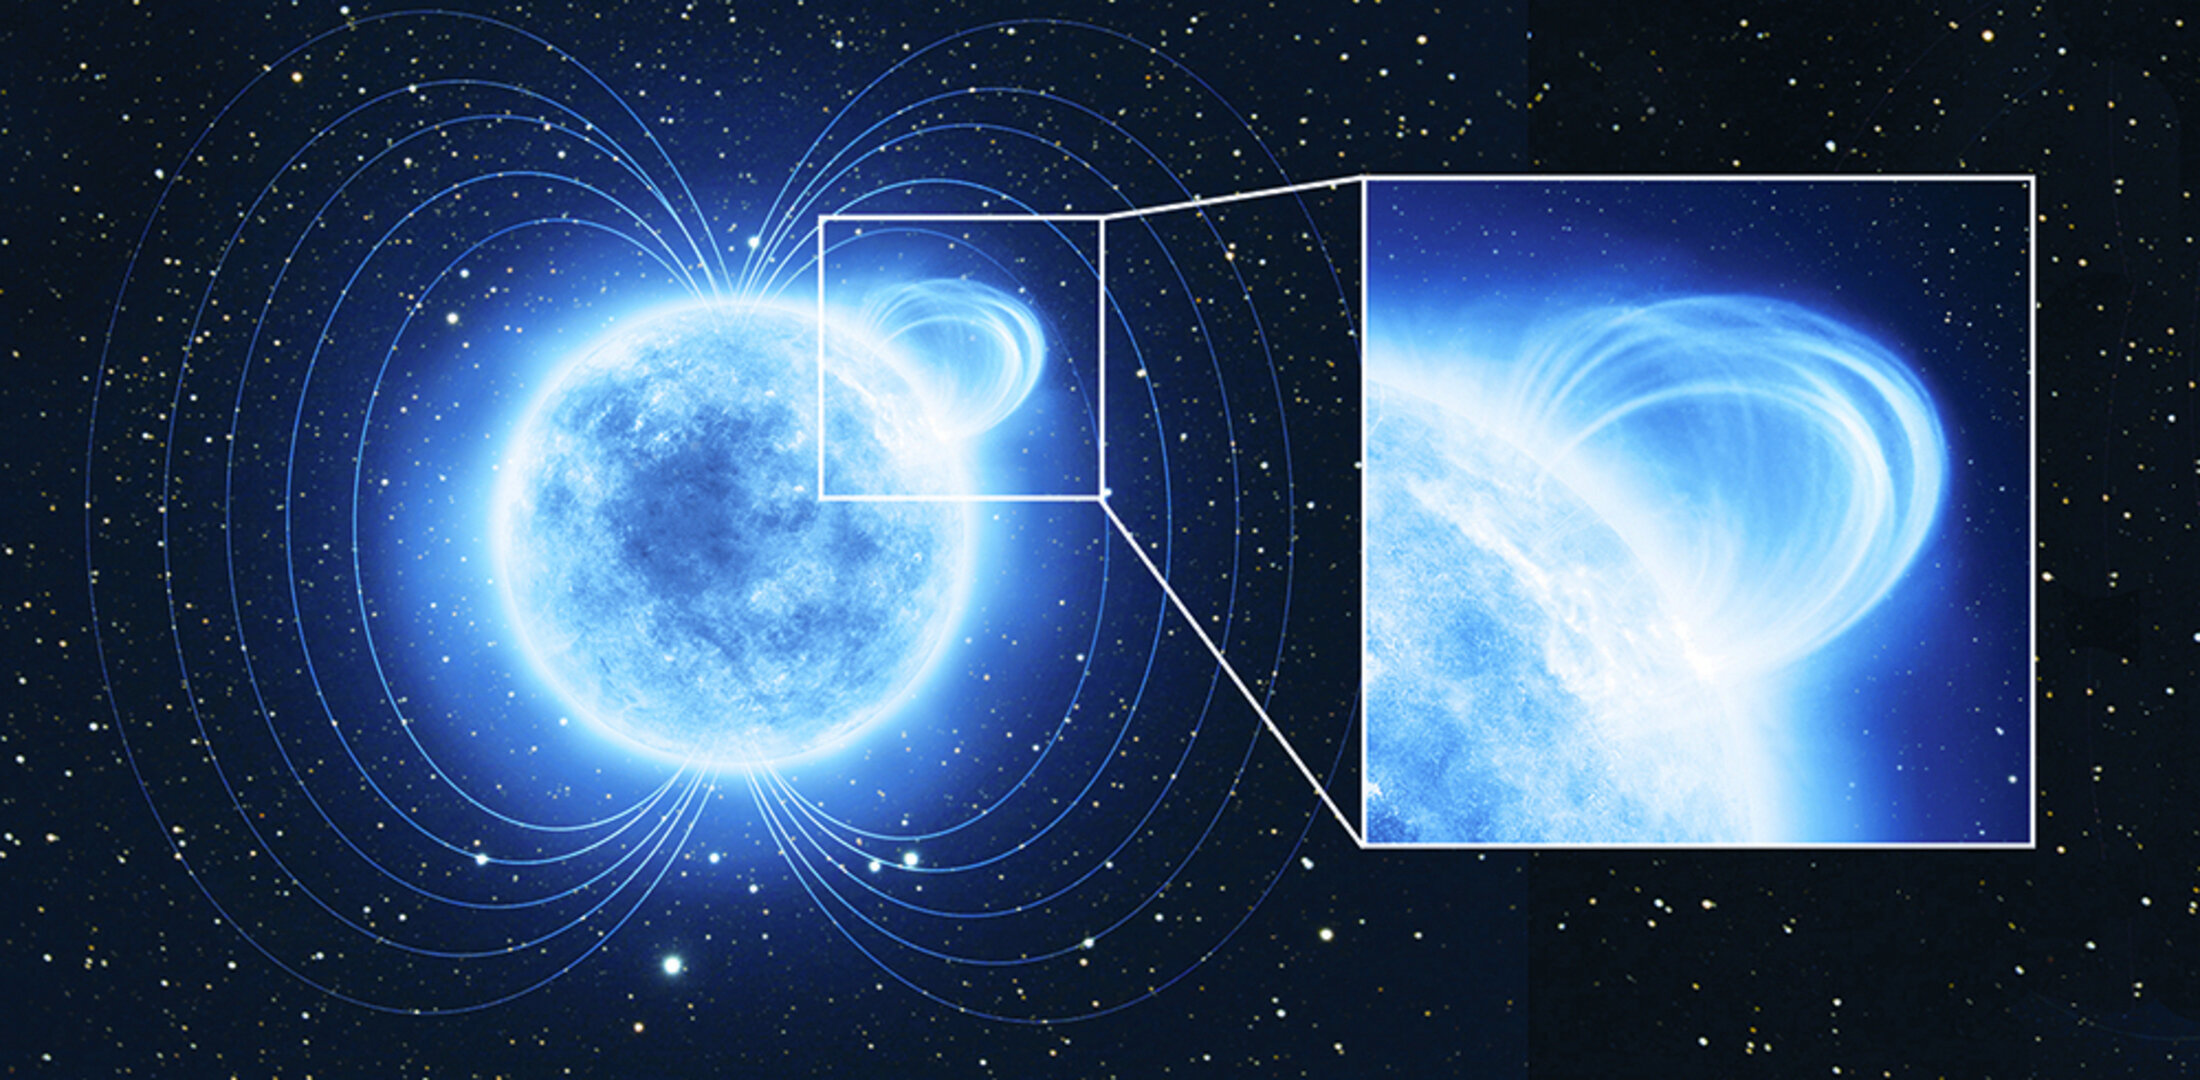 ESA - Mysterious magnetar boasts one of strongest magnetic fields